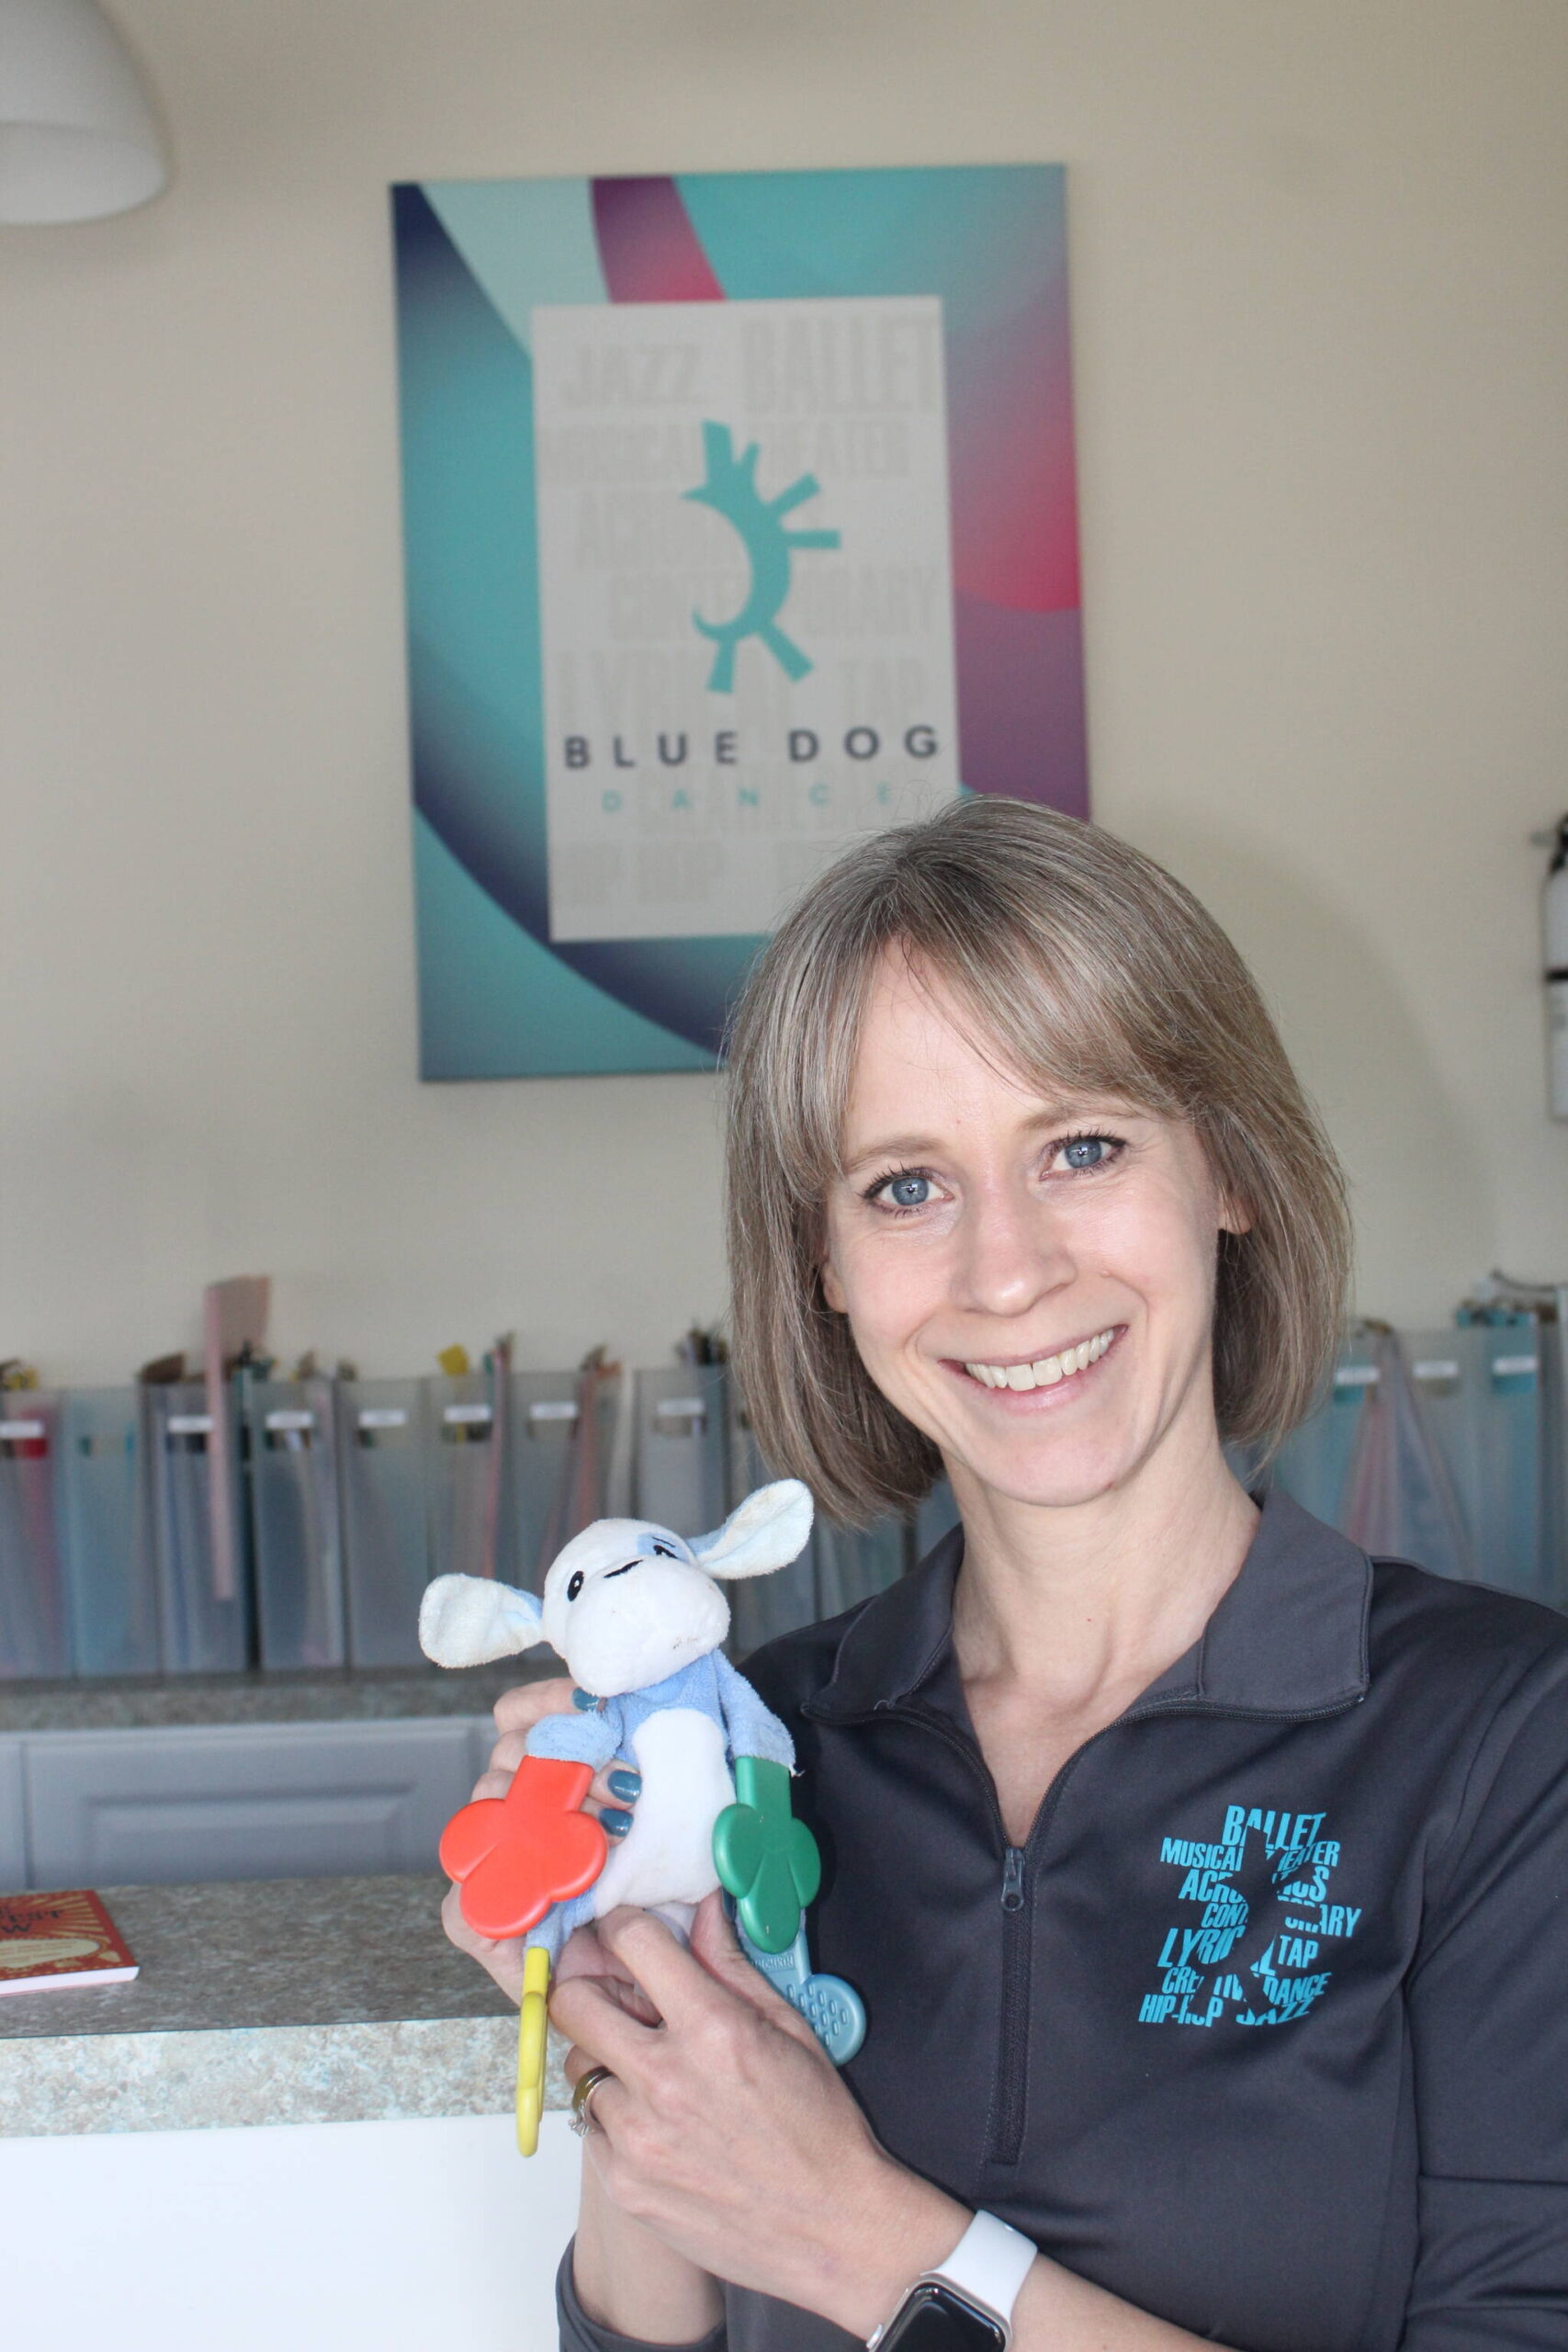 Blue Dog Dance founder Barbara Walshe holds her daughters’ toy that inspired the name of her dance studio. Photo by Bailey Jo Josie/Alb Media.